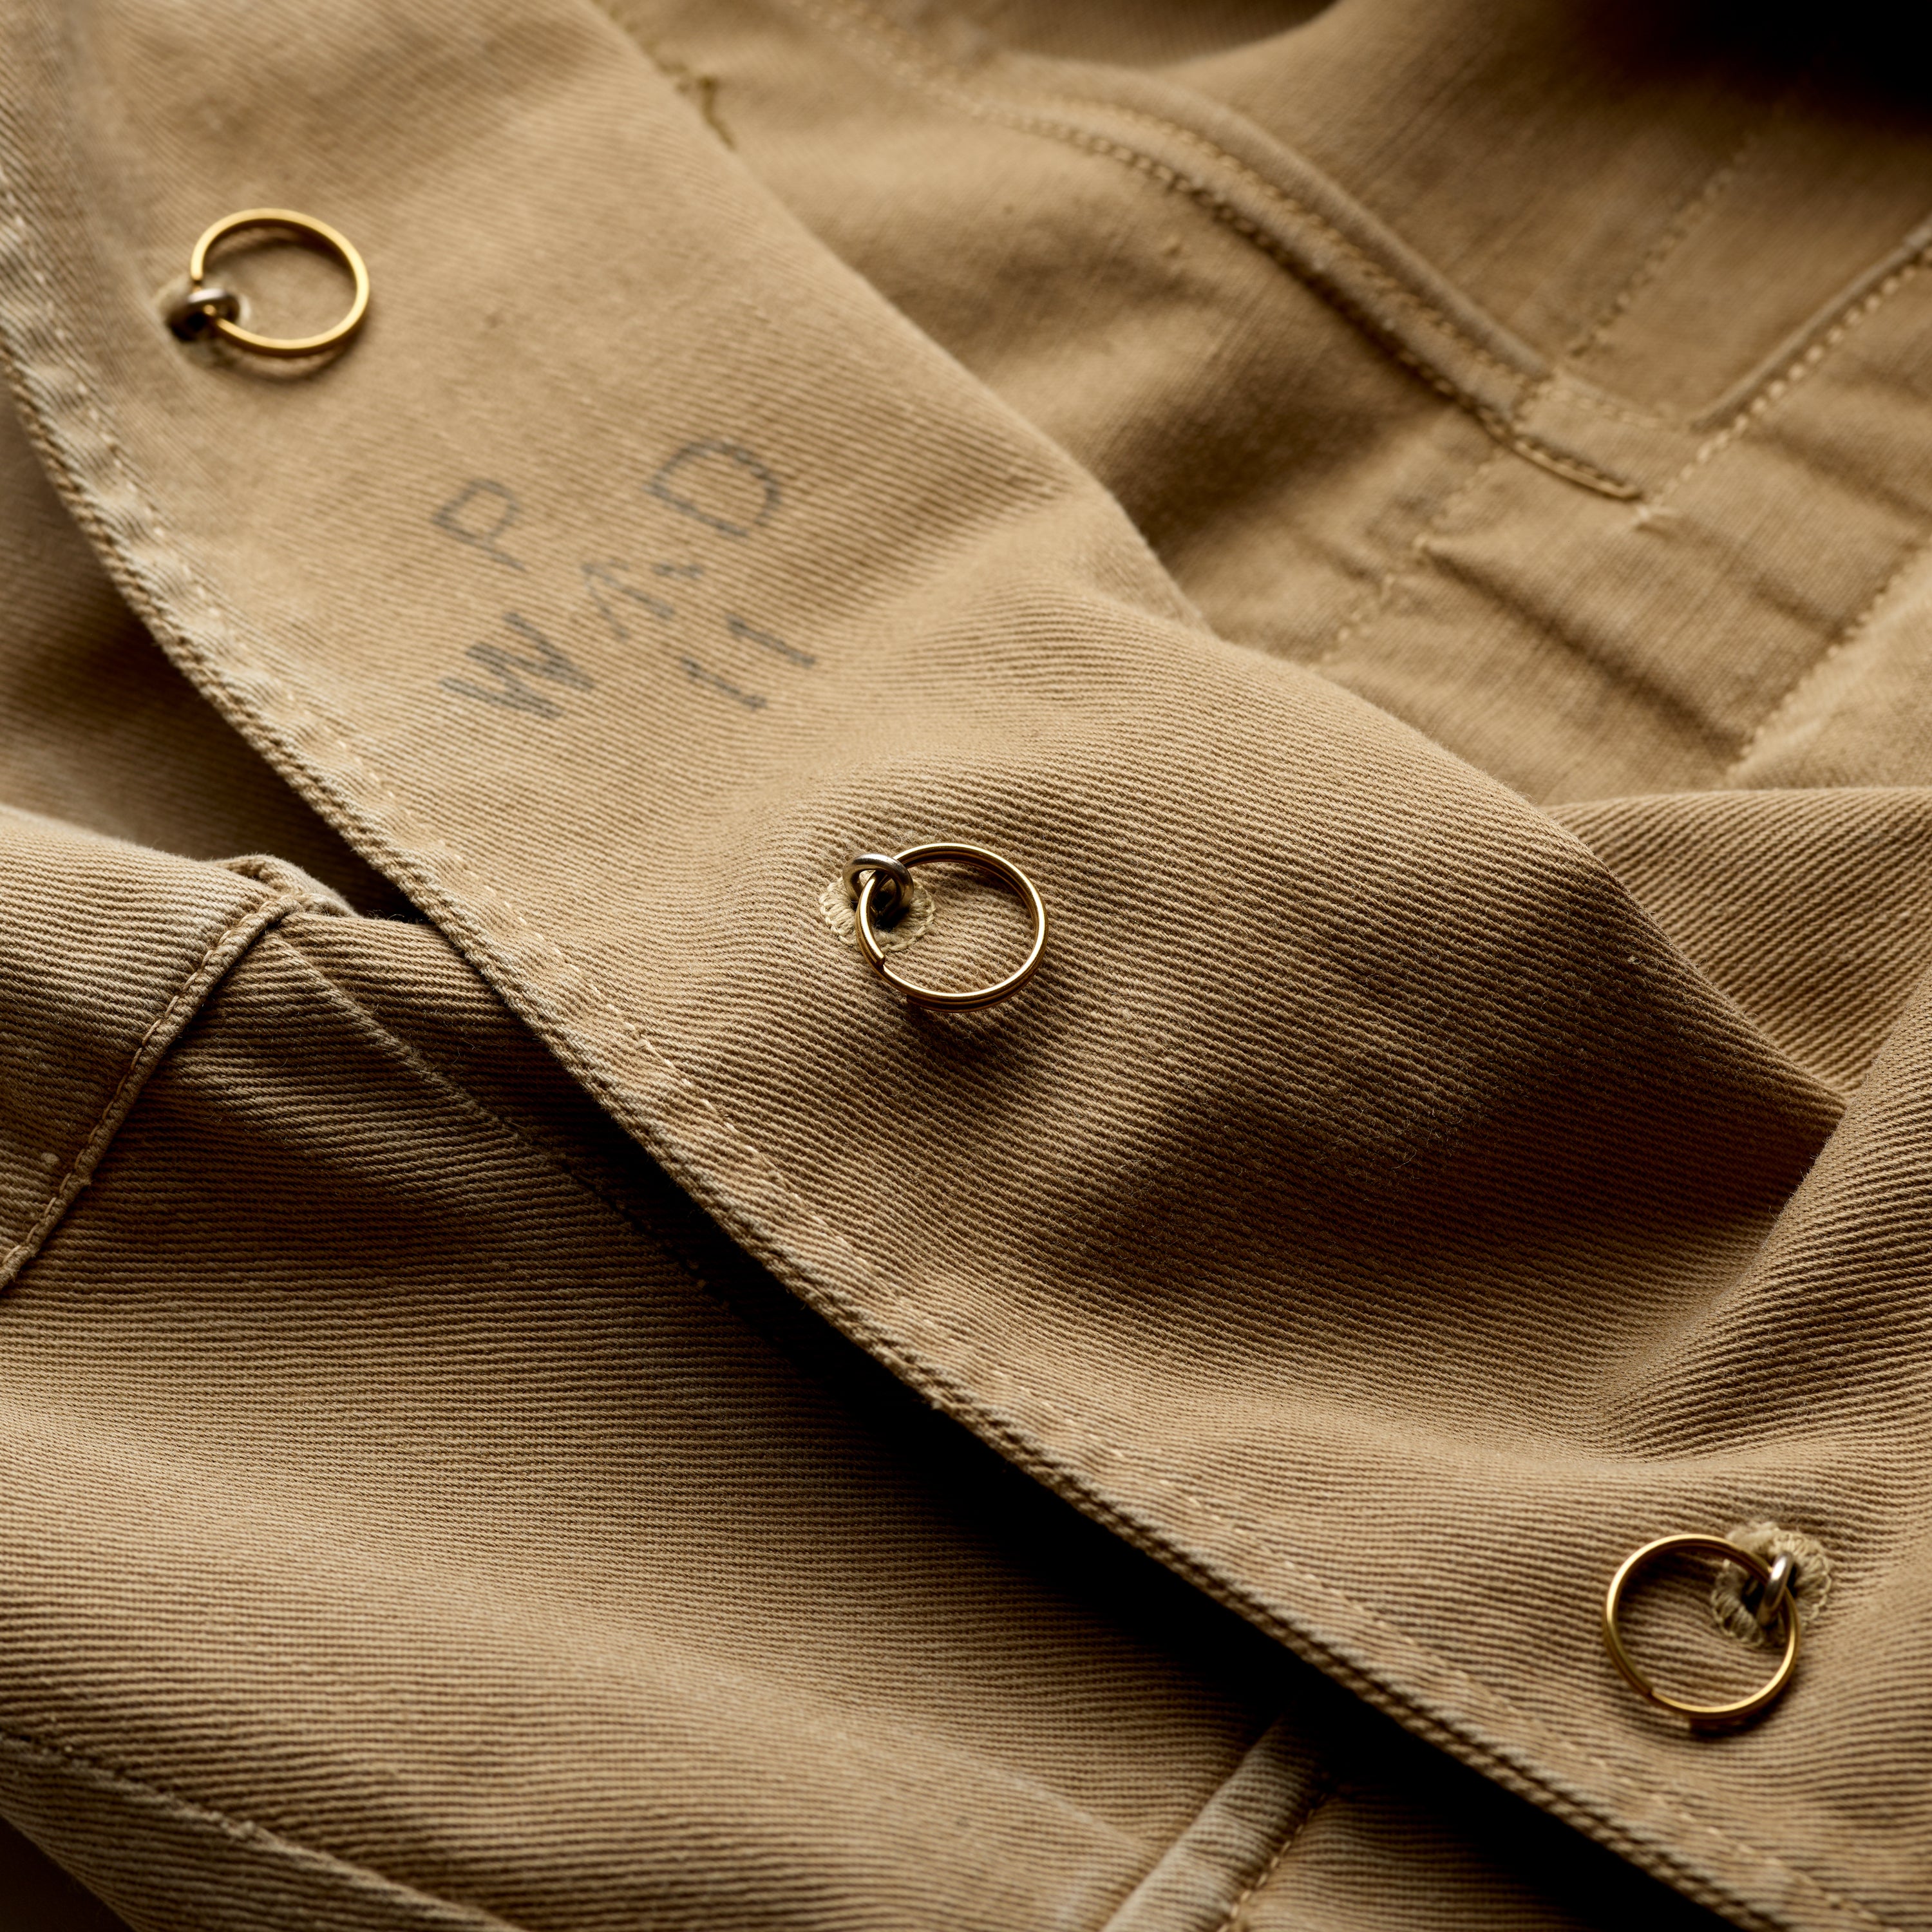 The WWII Khaki Air Force Jacket